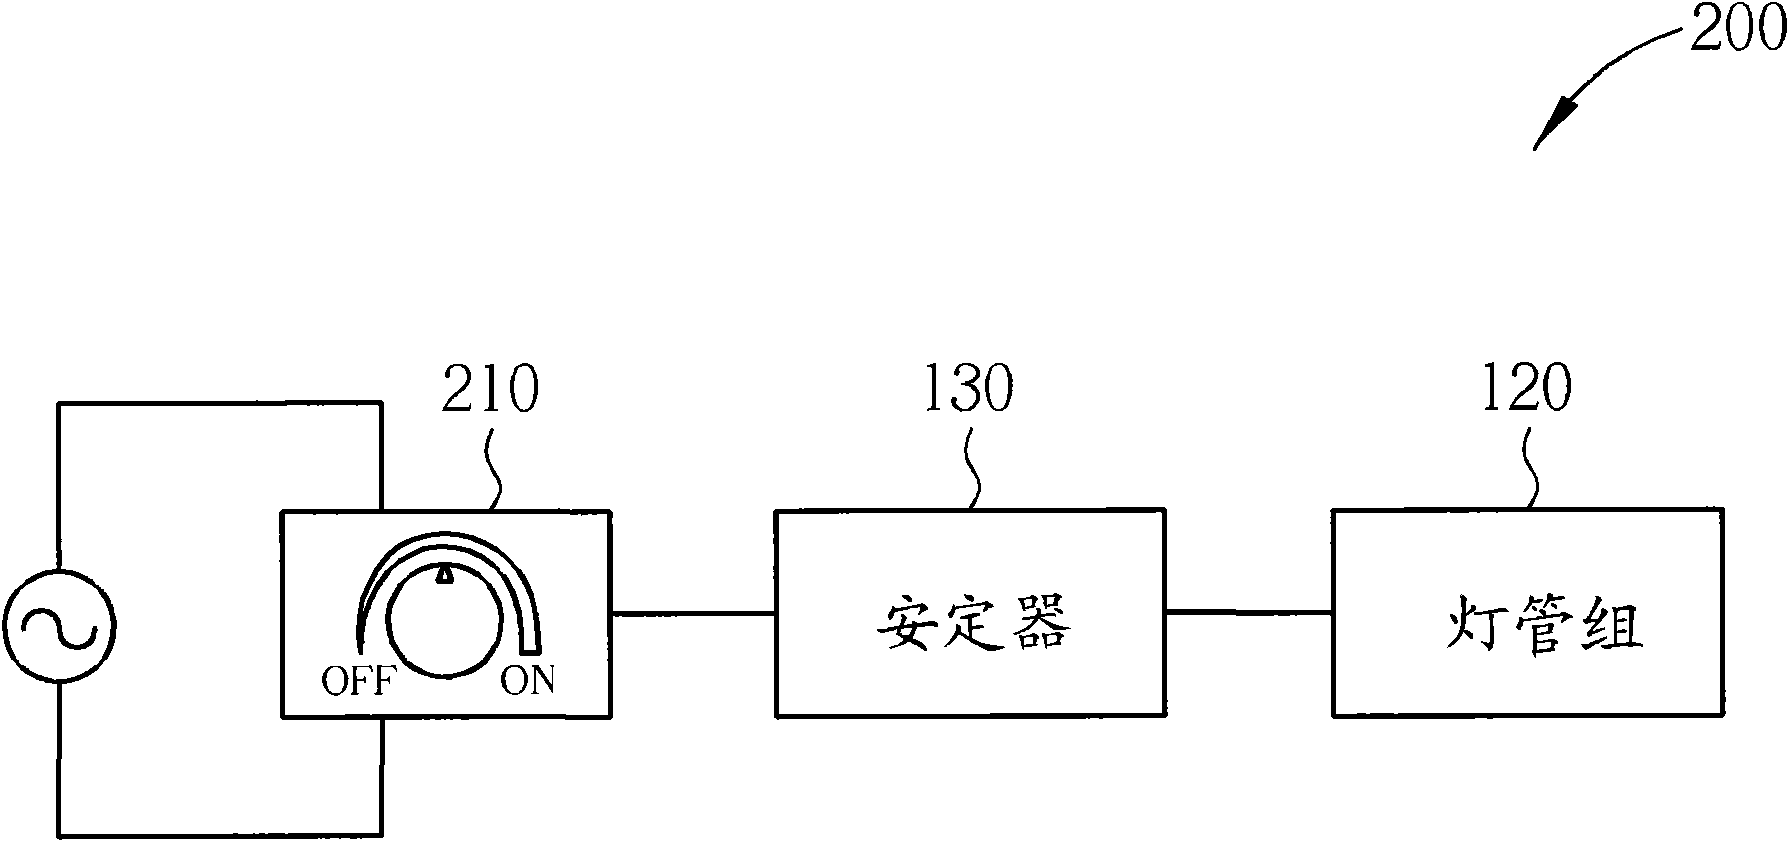 Light dimming method using switch-type switch and related lighting system